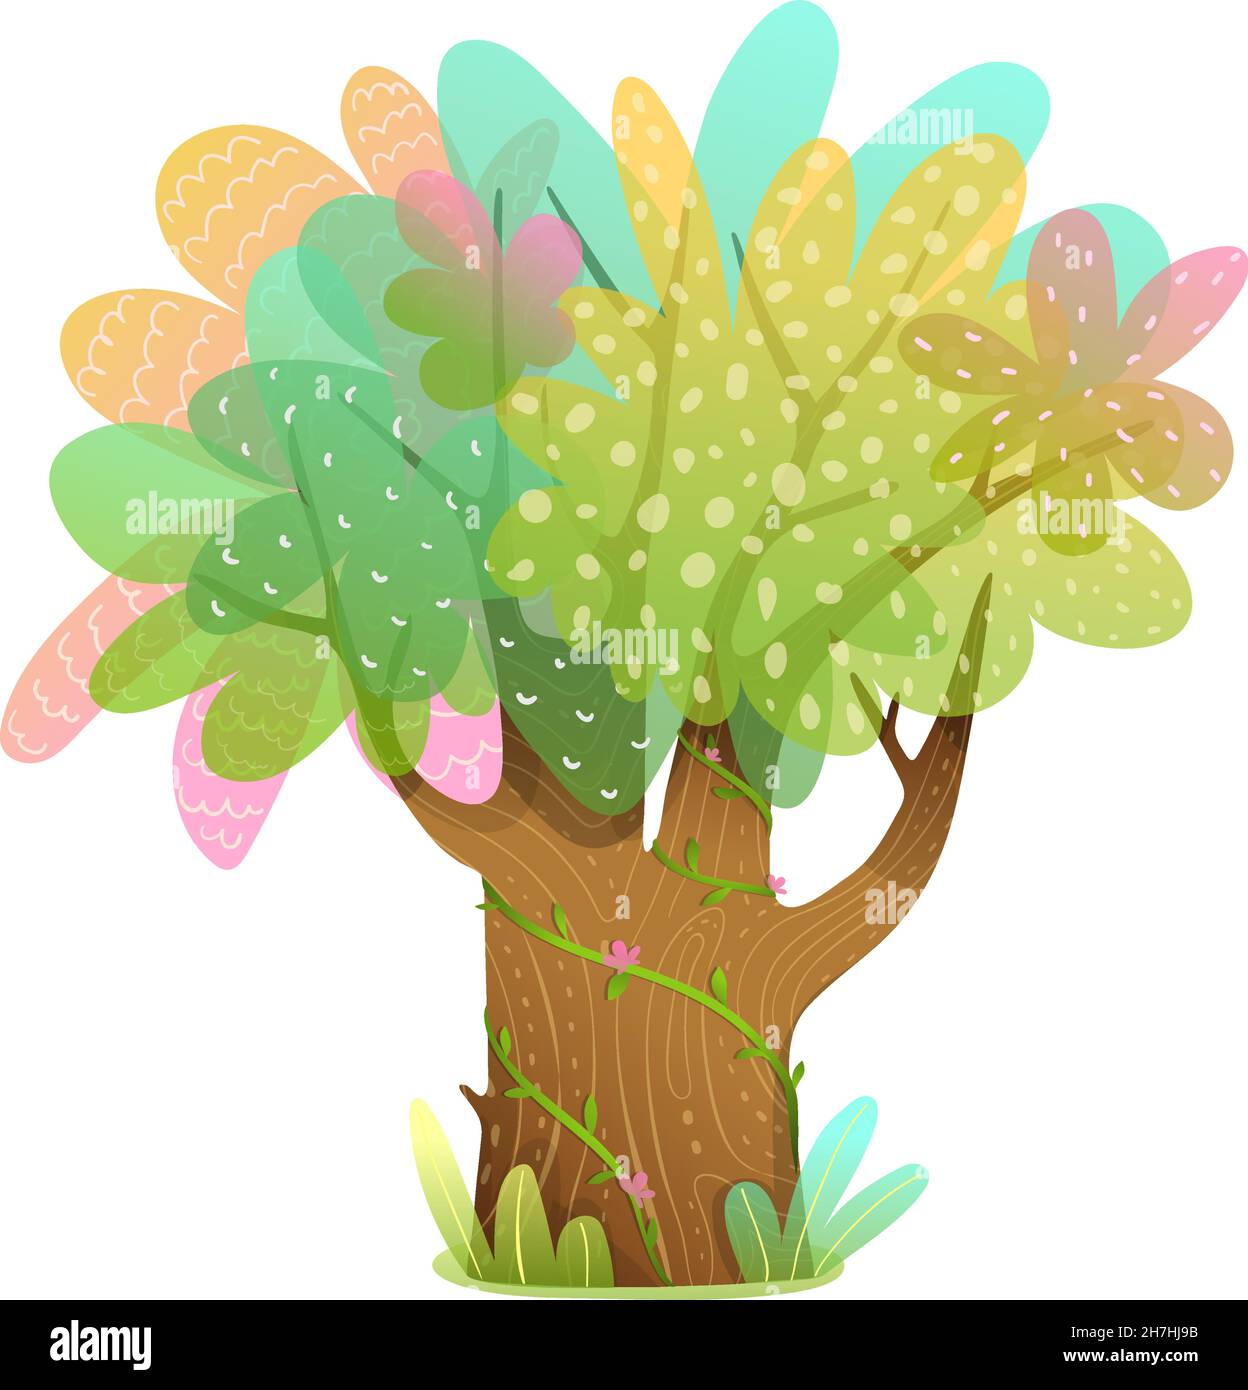 forest trees clipart